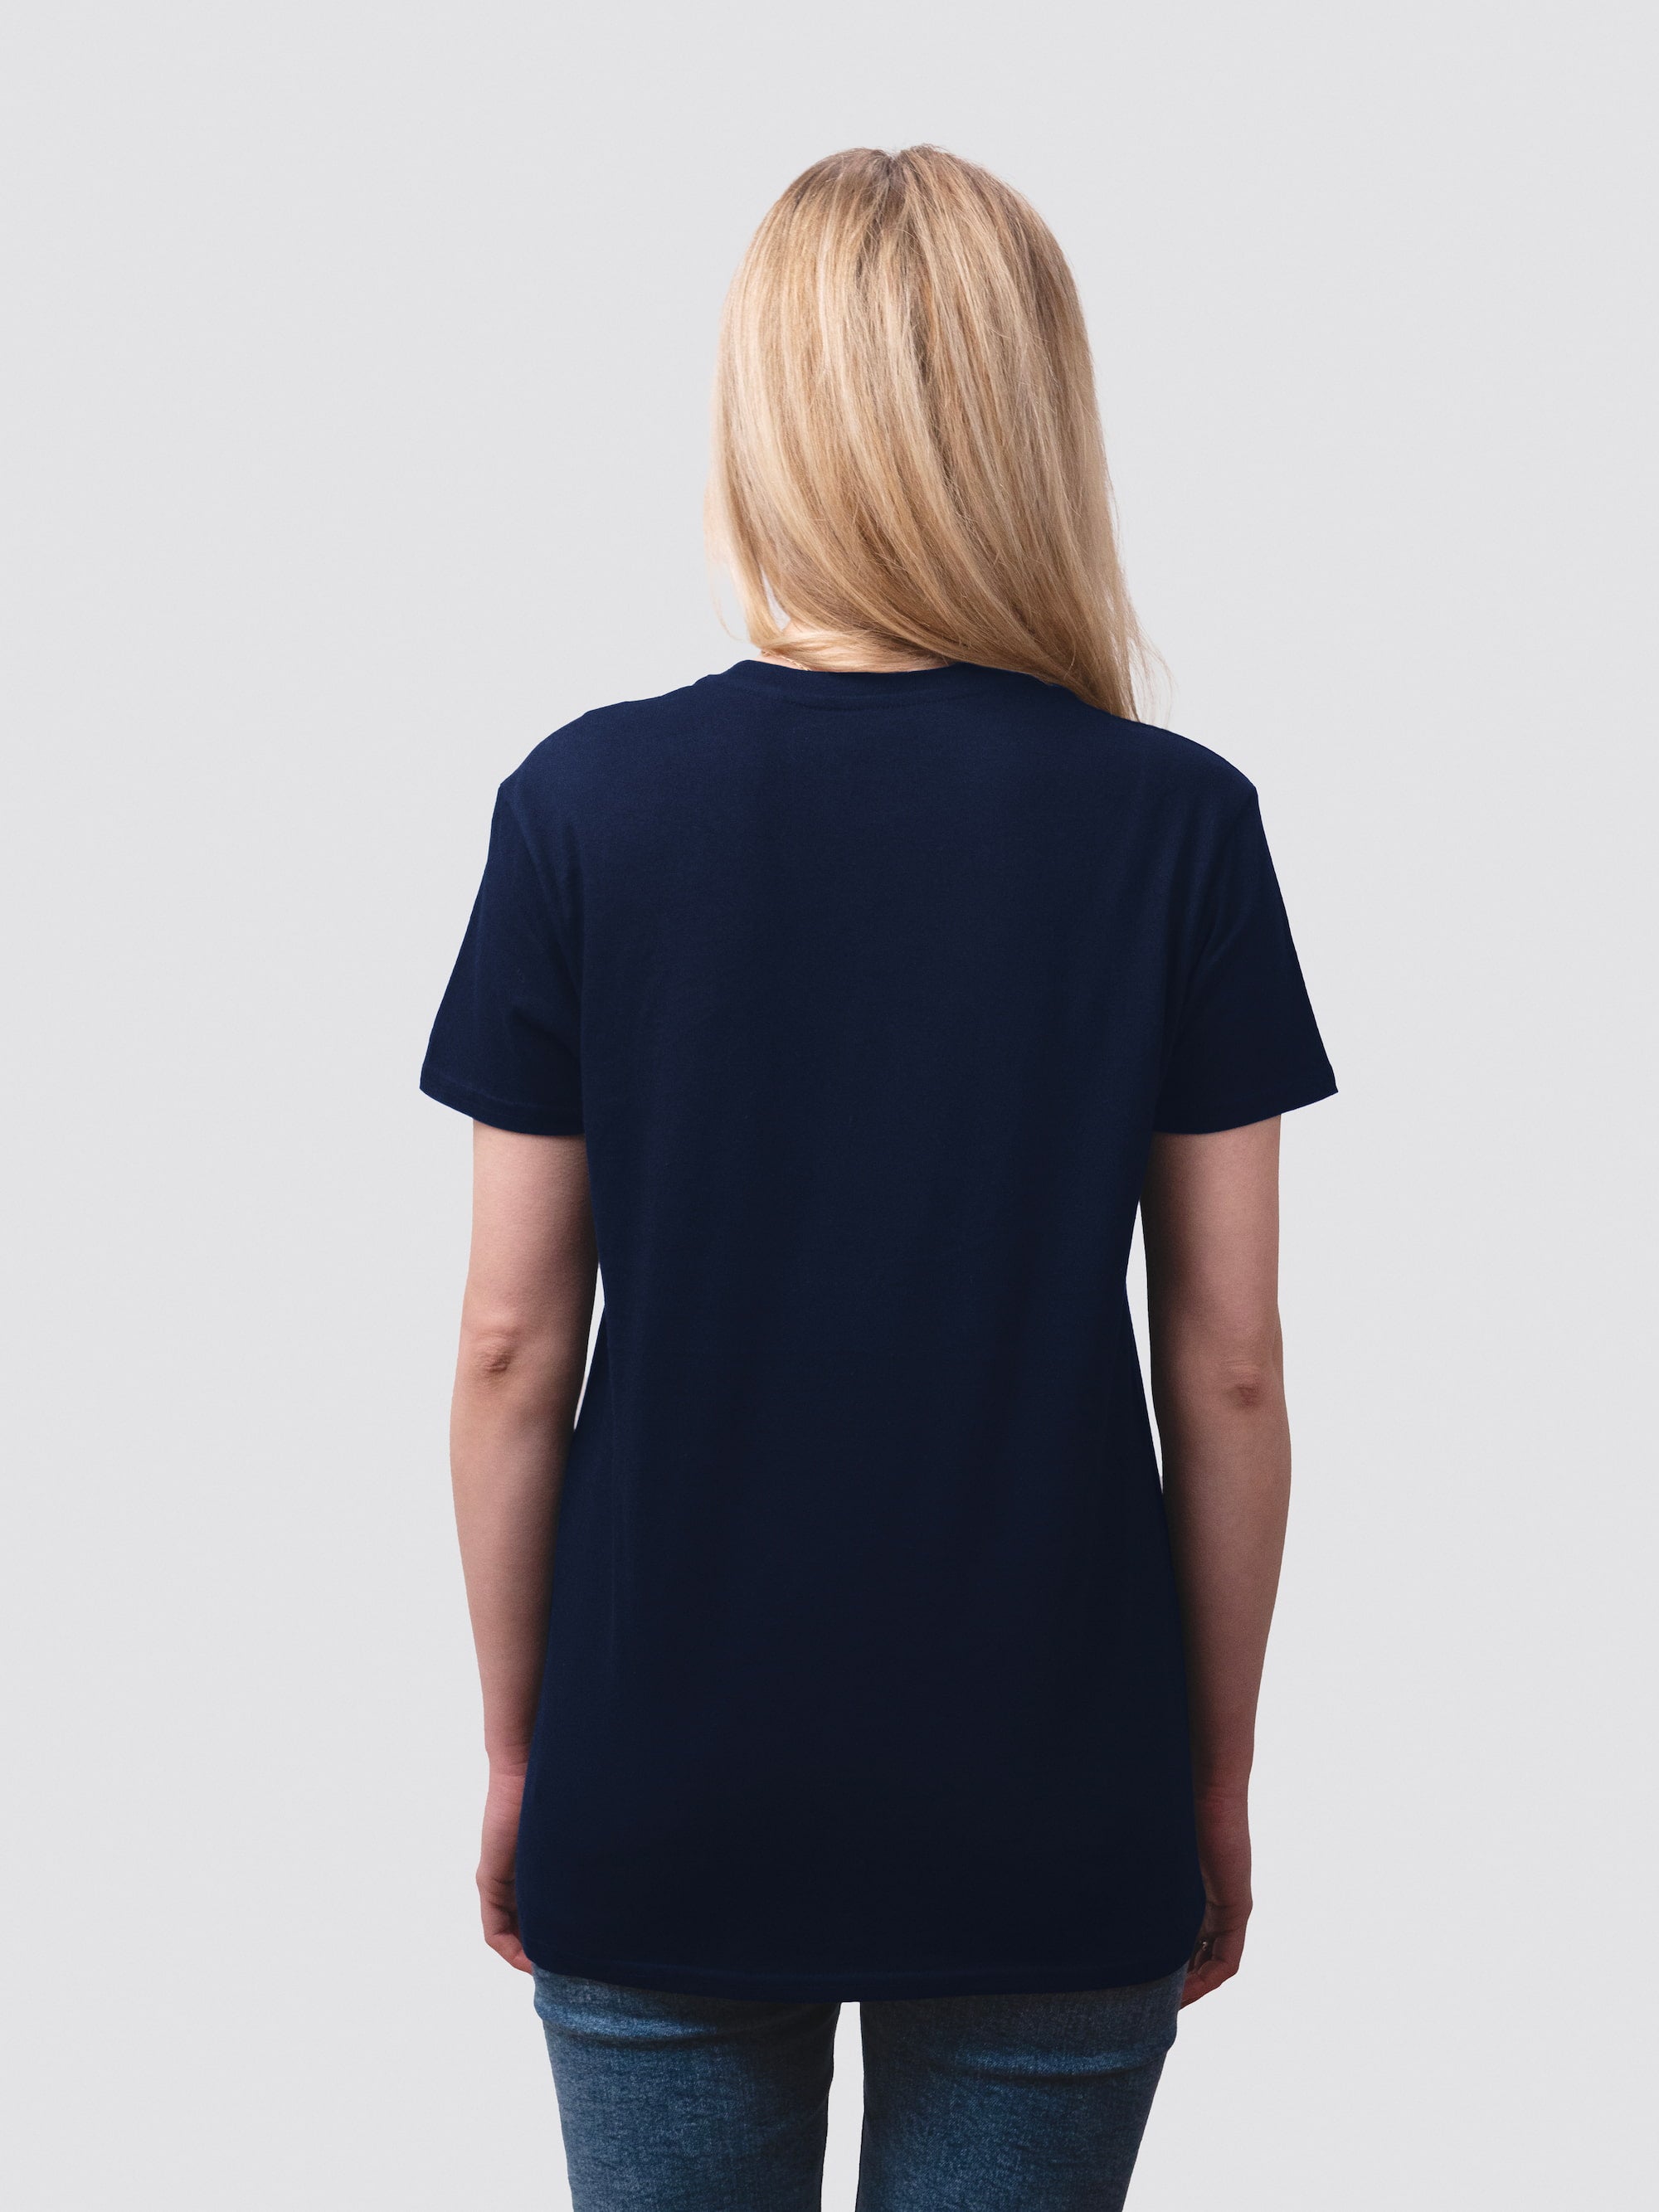 The back of a navy short-sleeve shirt, worn by a female student